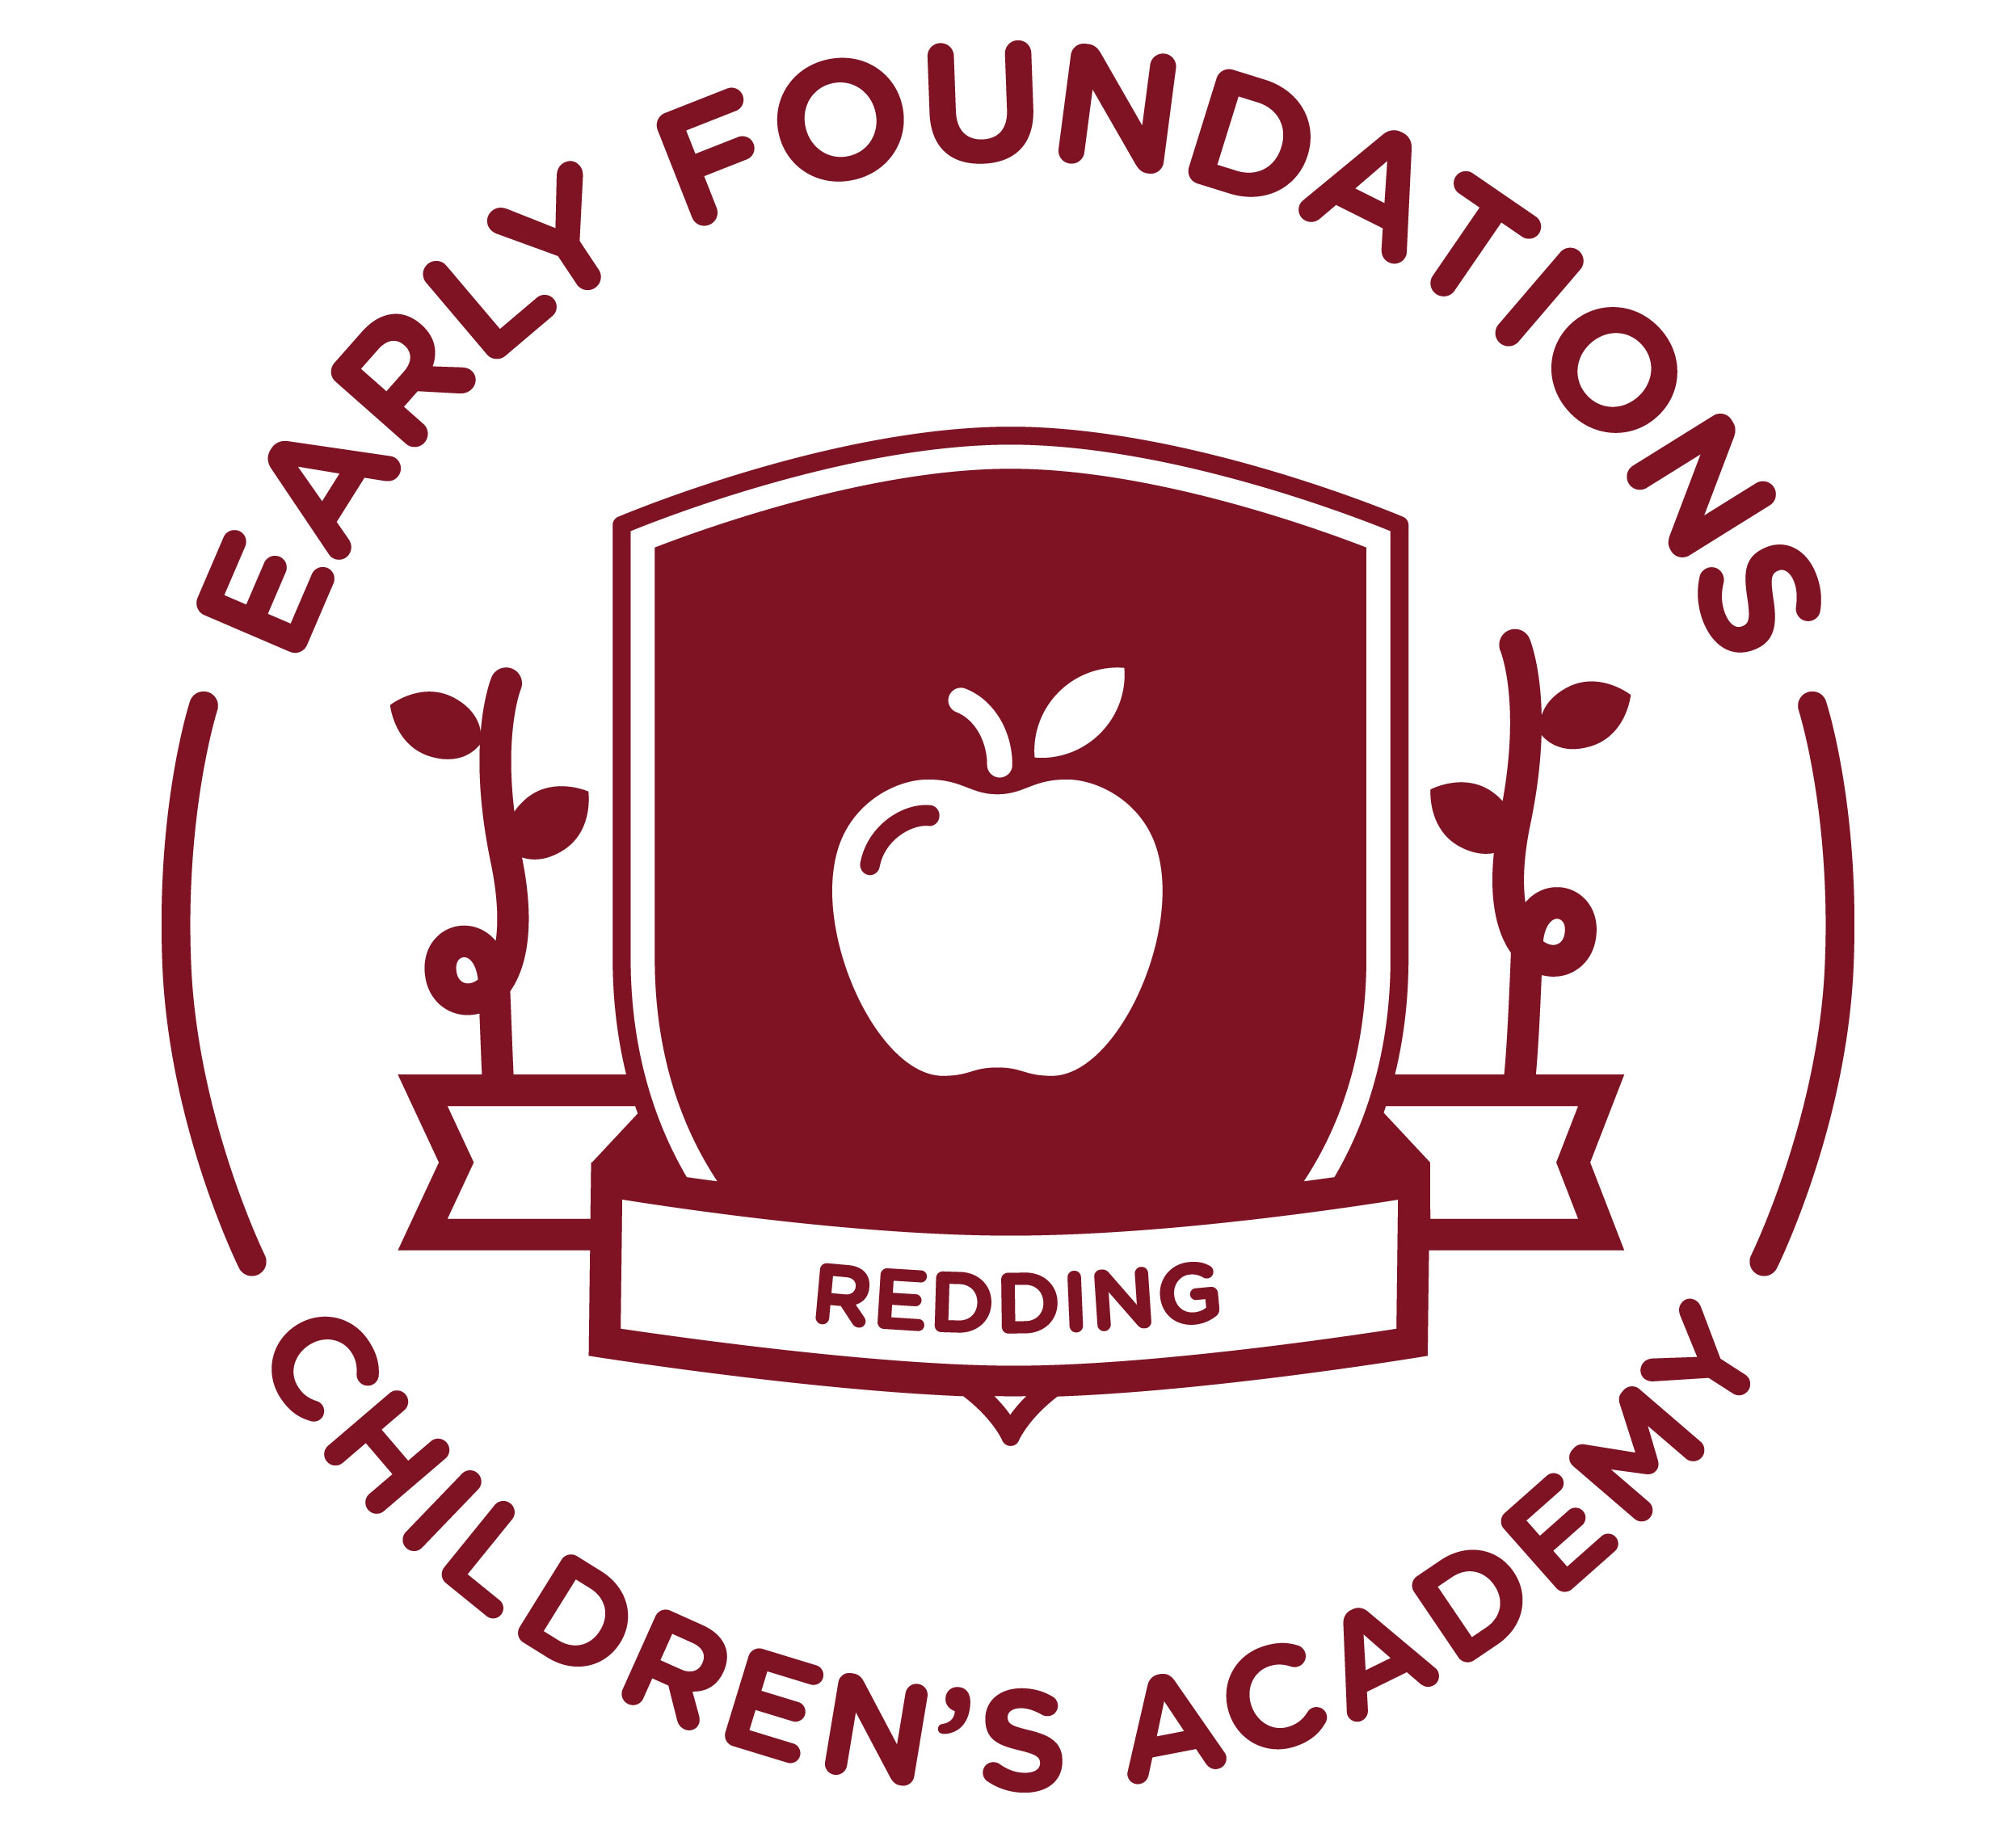 Trusted Child Care for Toddlers, Preschool and Pre-K in Redding CA